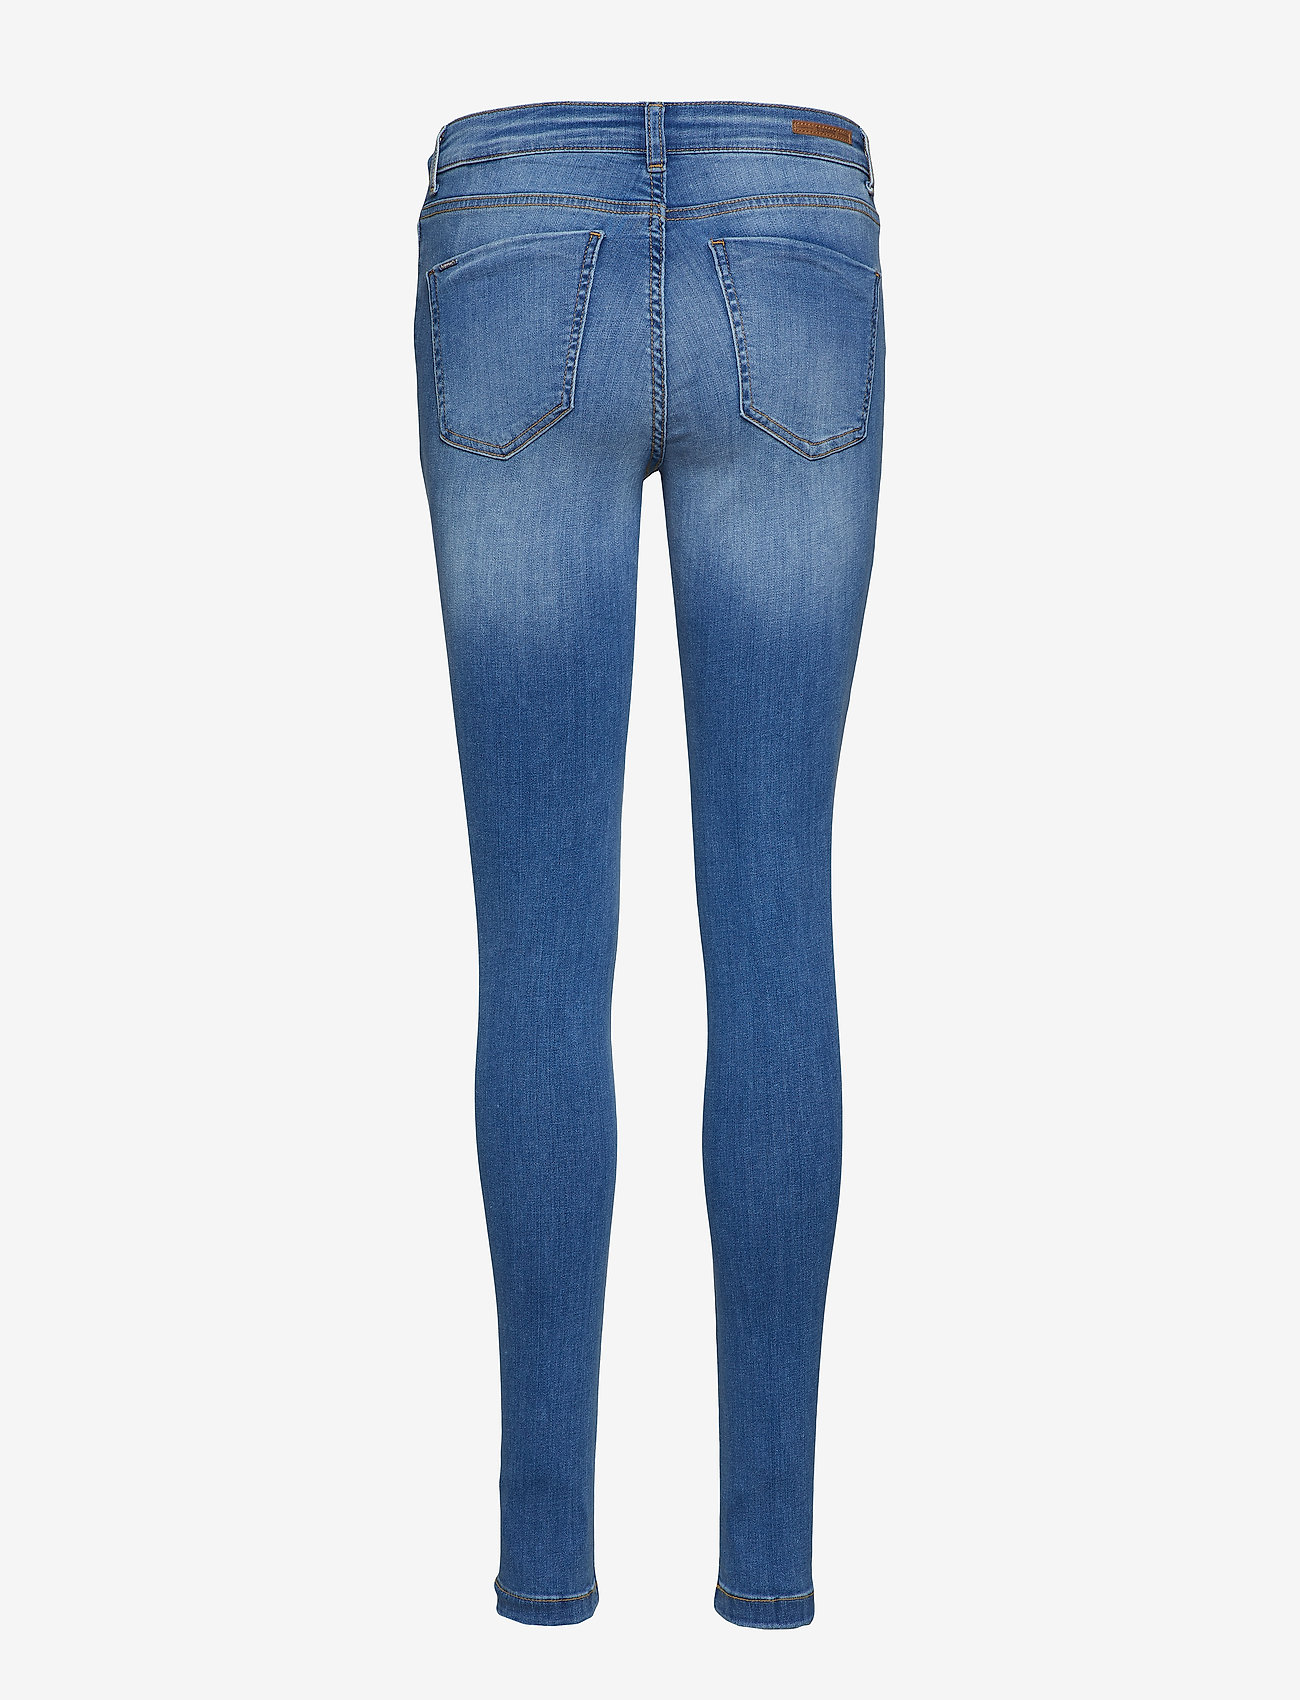 b.young - Lola Luni jeans - - slim fit jeans - light blue - 1